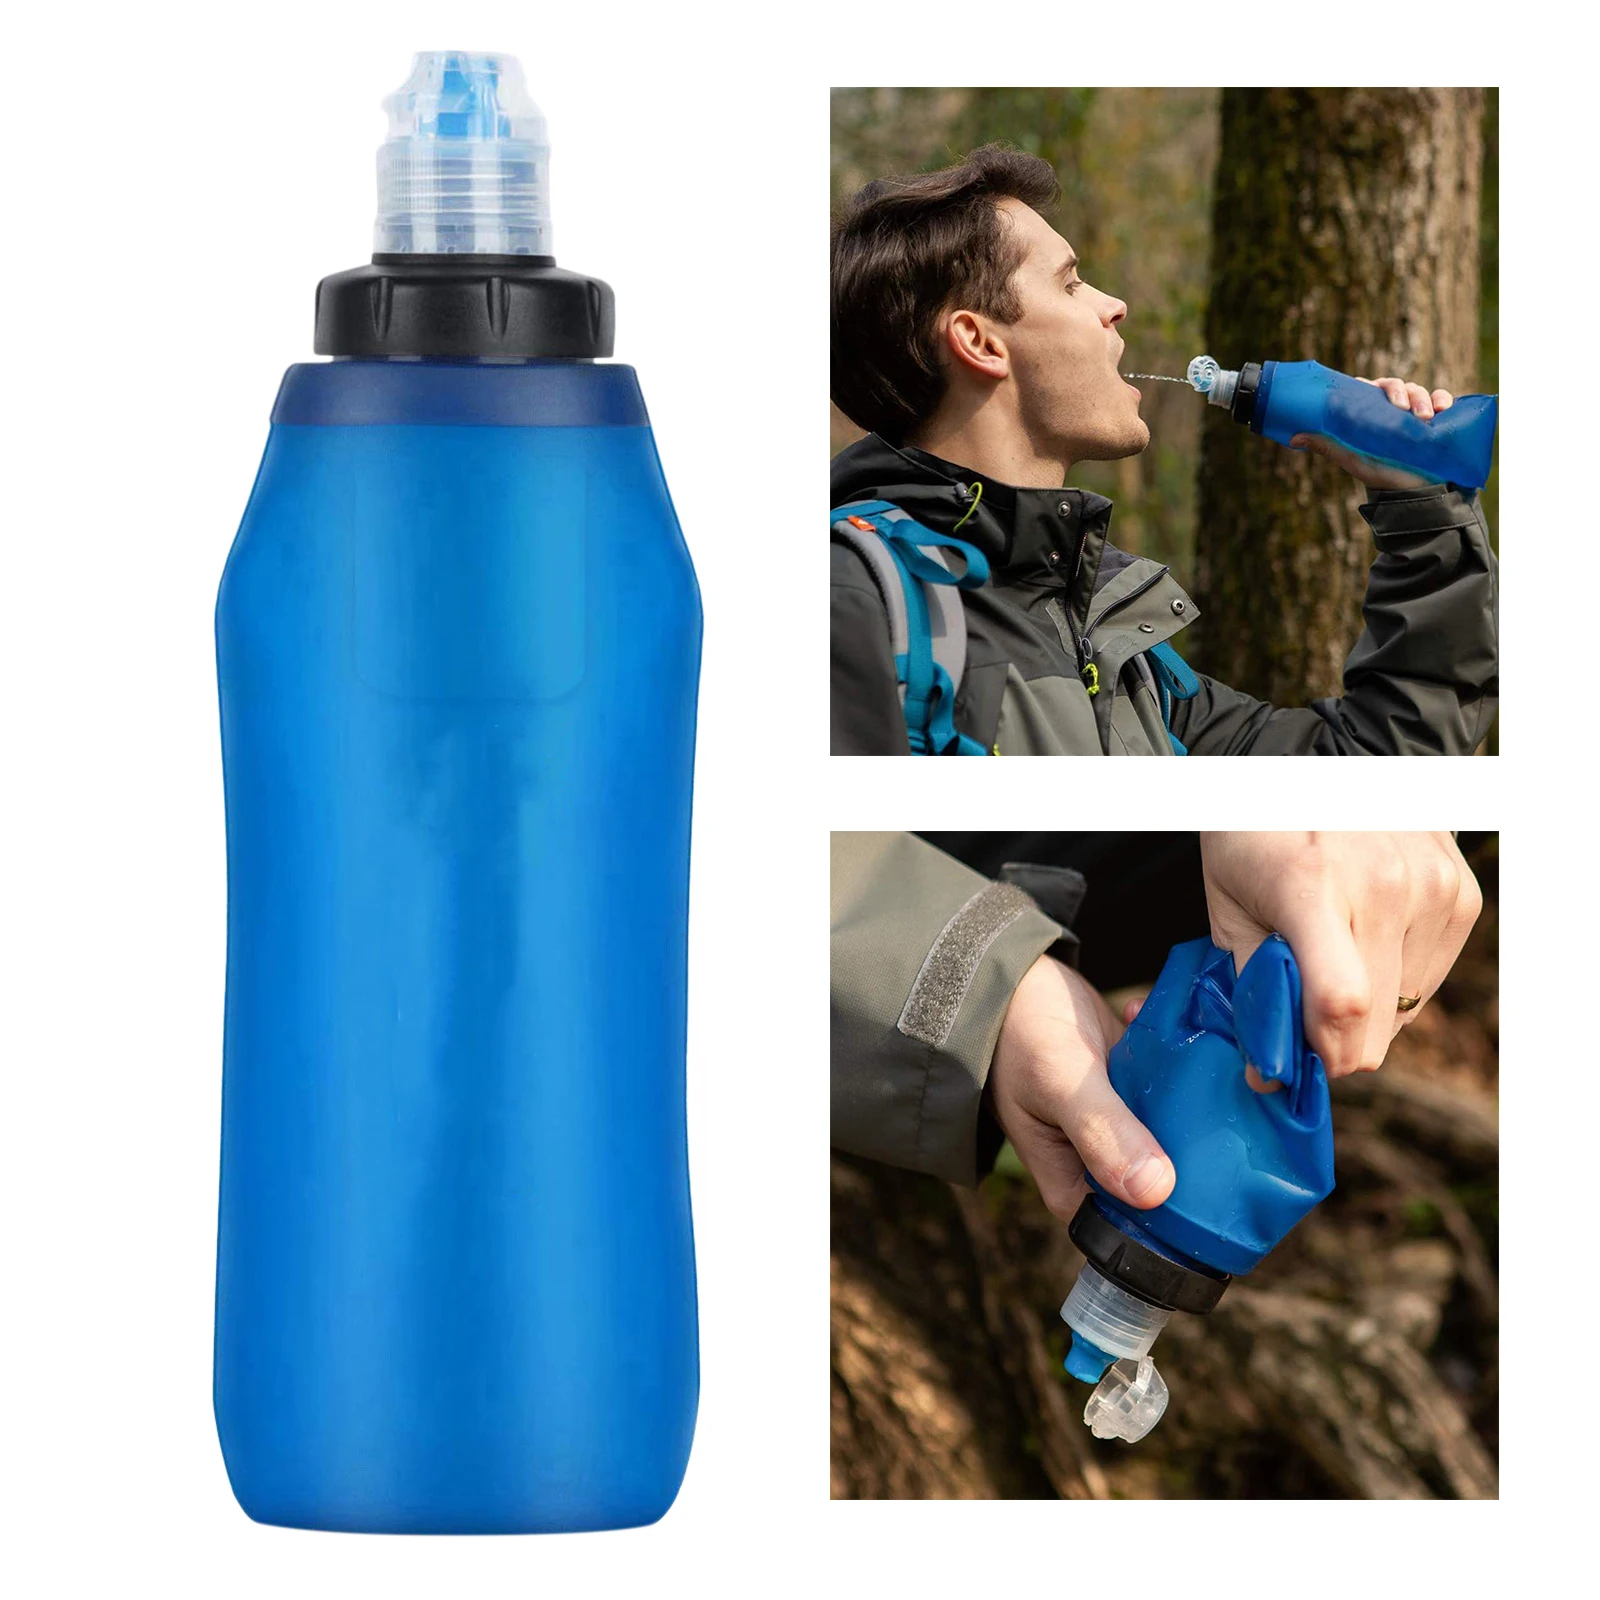 Outdoor Survival Water Filter Bottle Purifier Filtration Emergency Camping